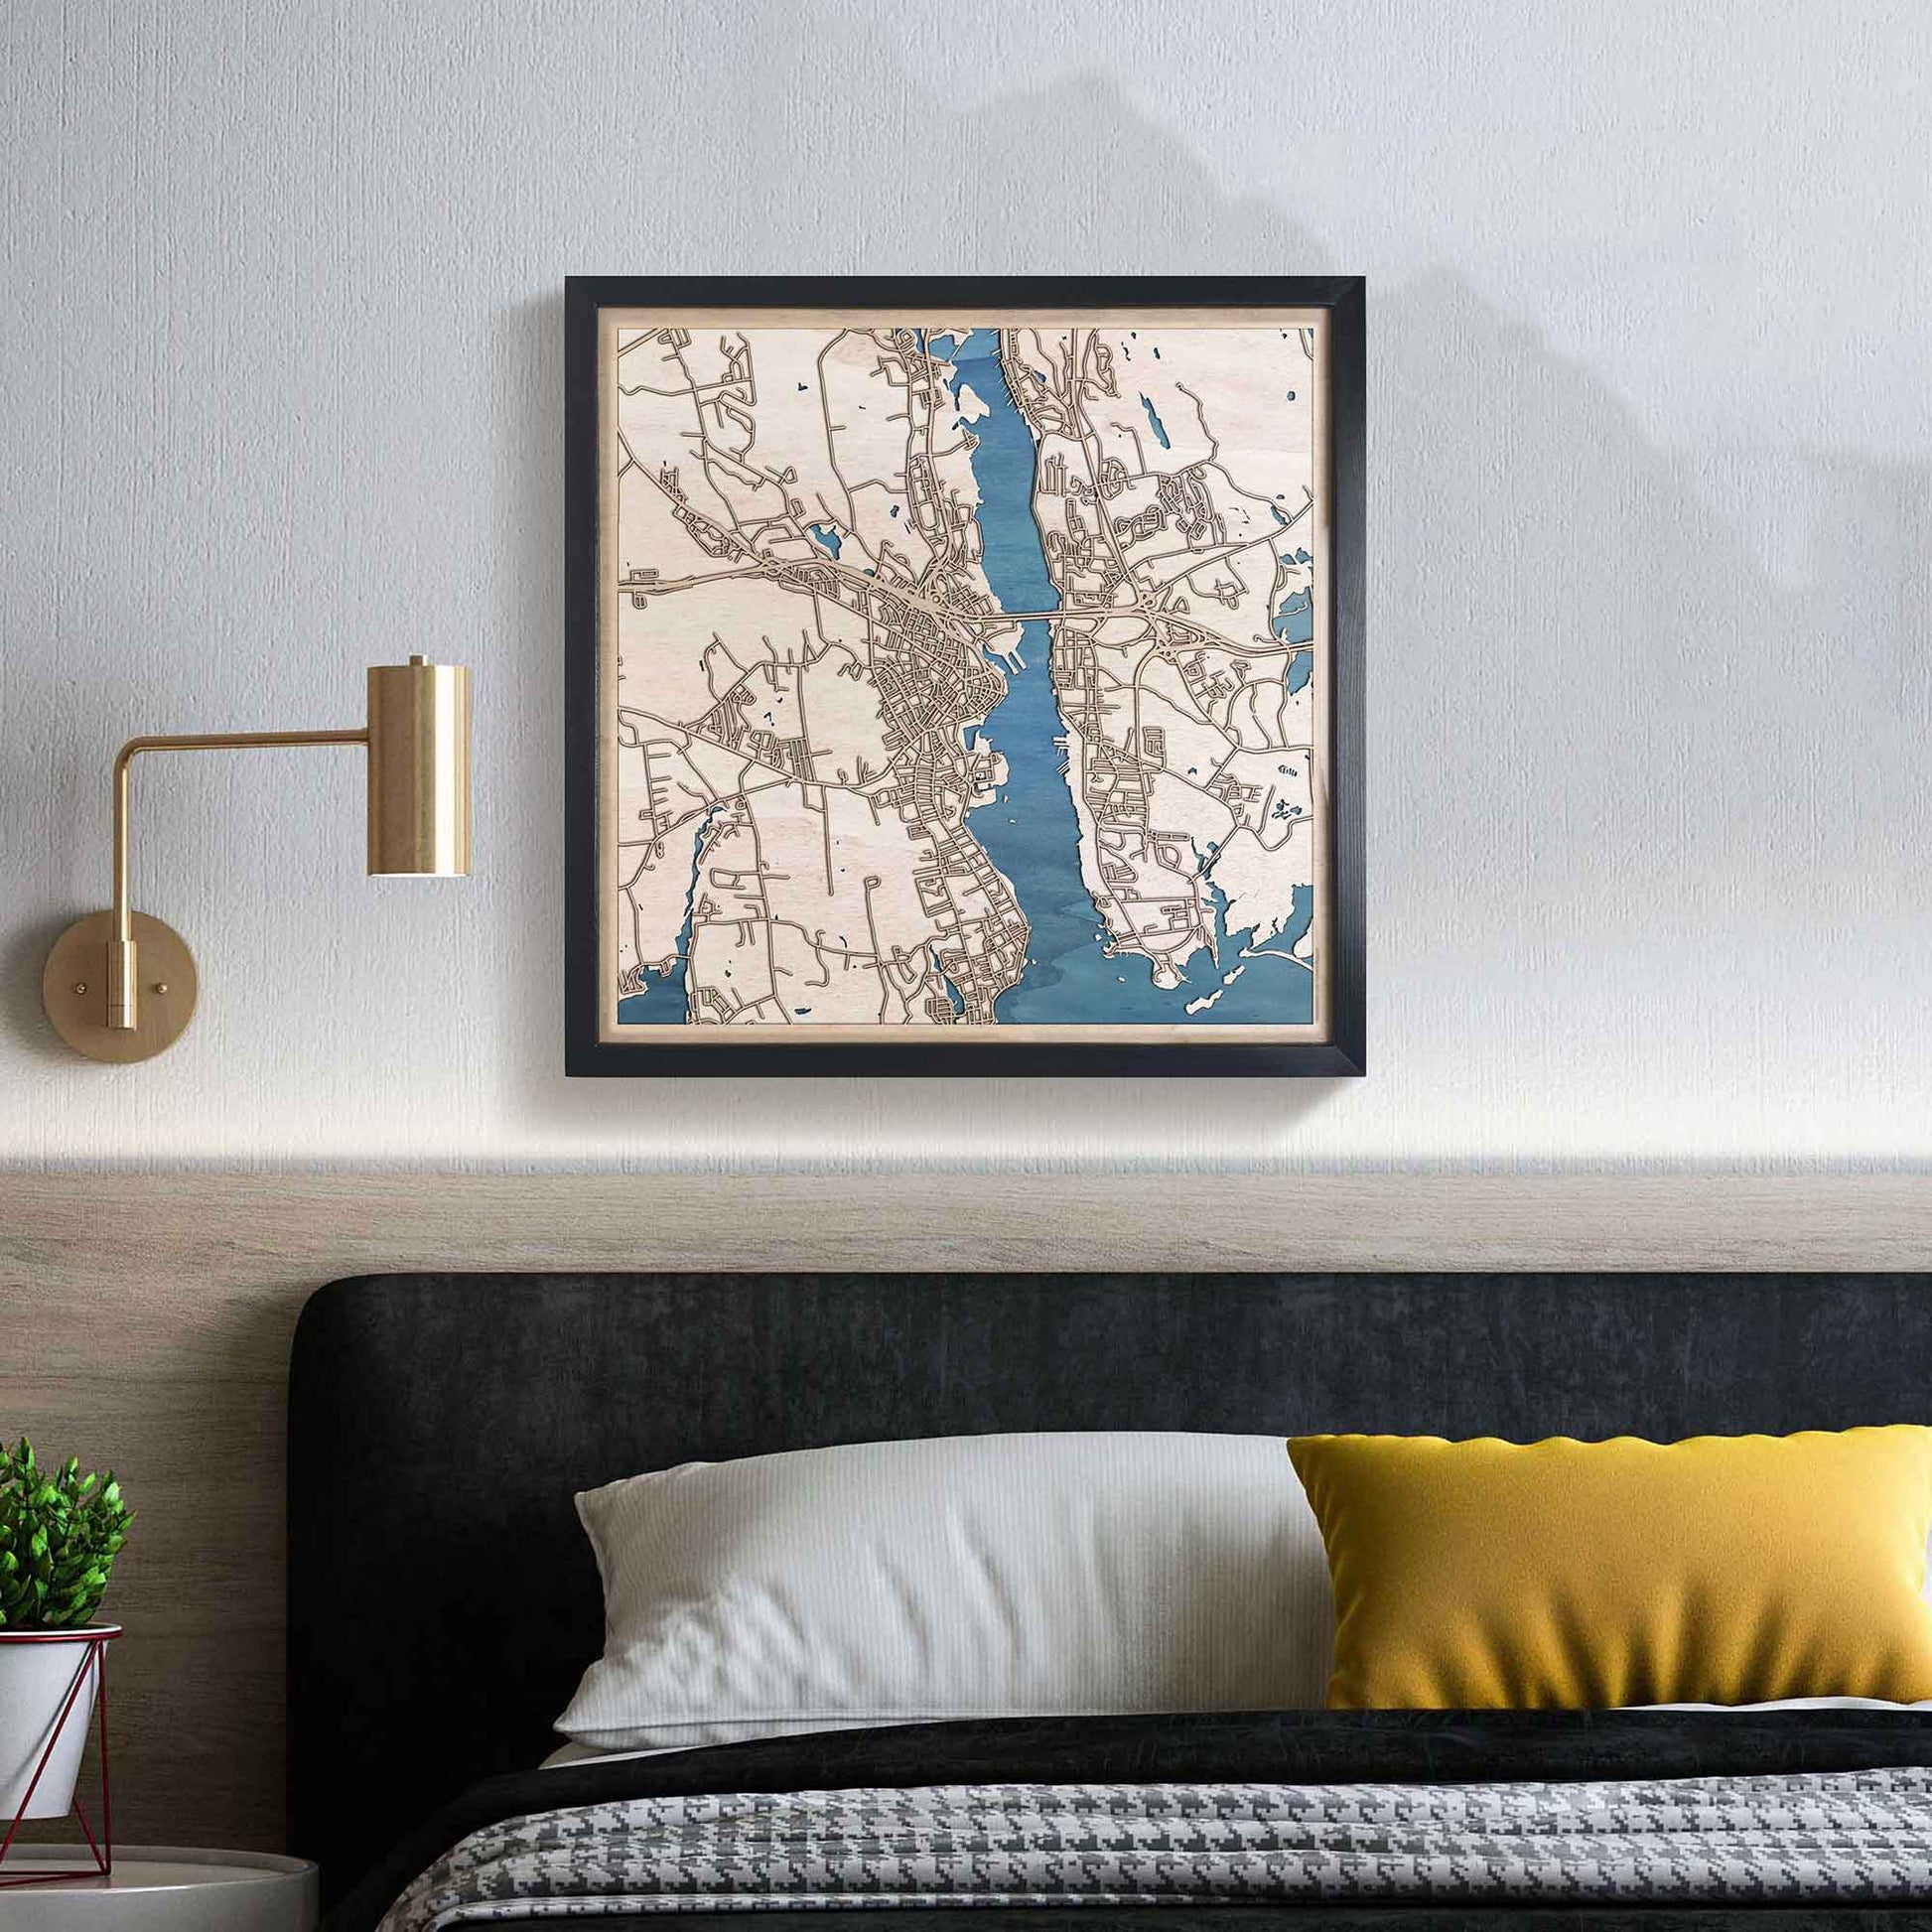 New London Wooden Map by CityWood - Custom Wood Map Art - Unique Laser Cut Engraved - Anniversary Gift